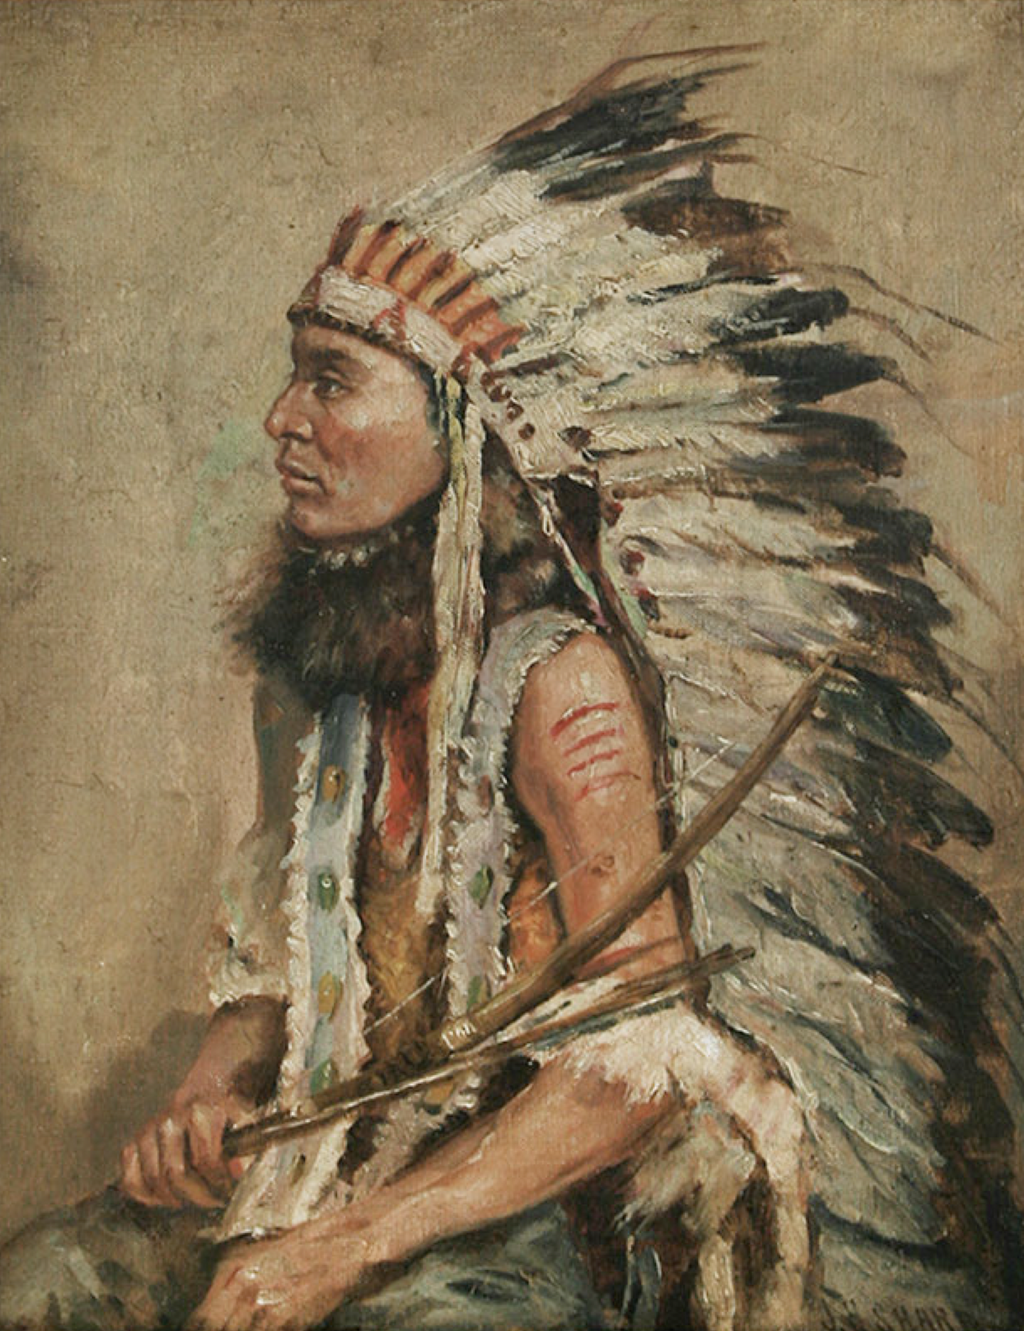 SOLD Joseph Henry Sharp (1859-1953) - Indian Chief in Feather Headdress